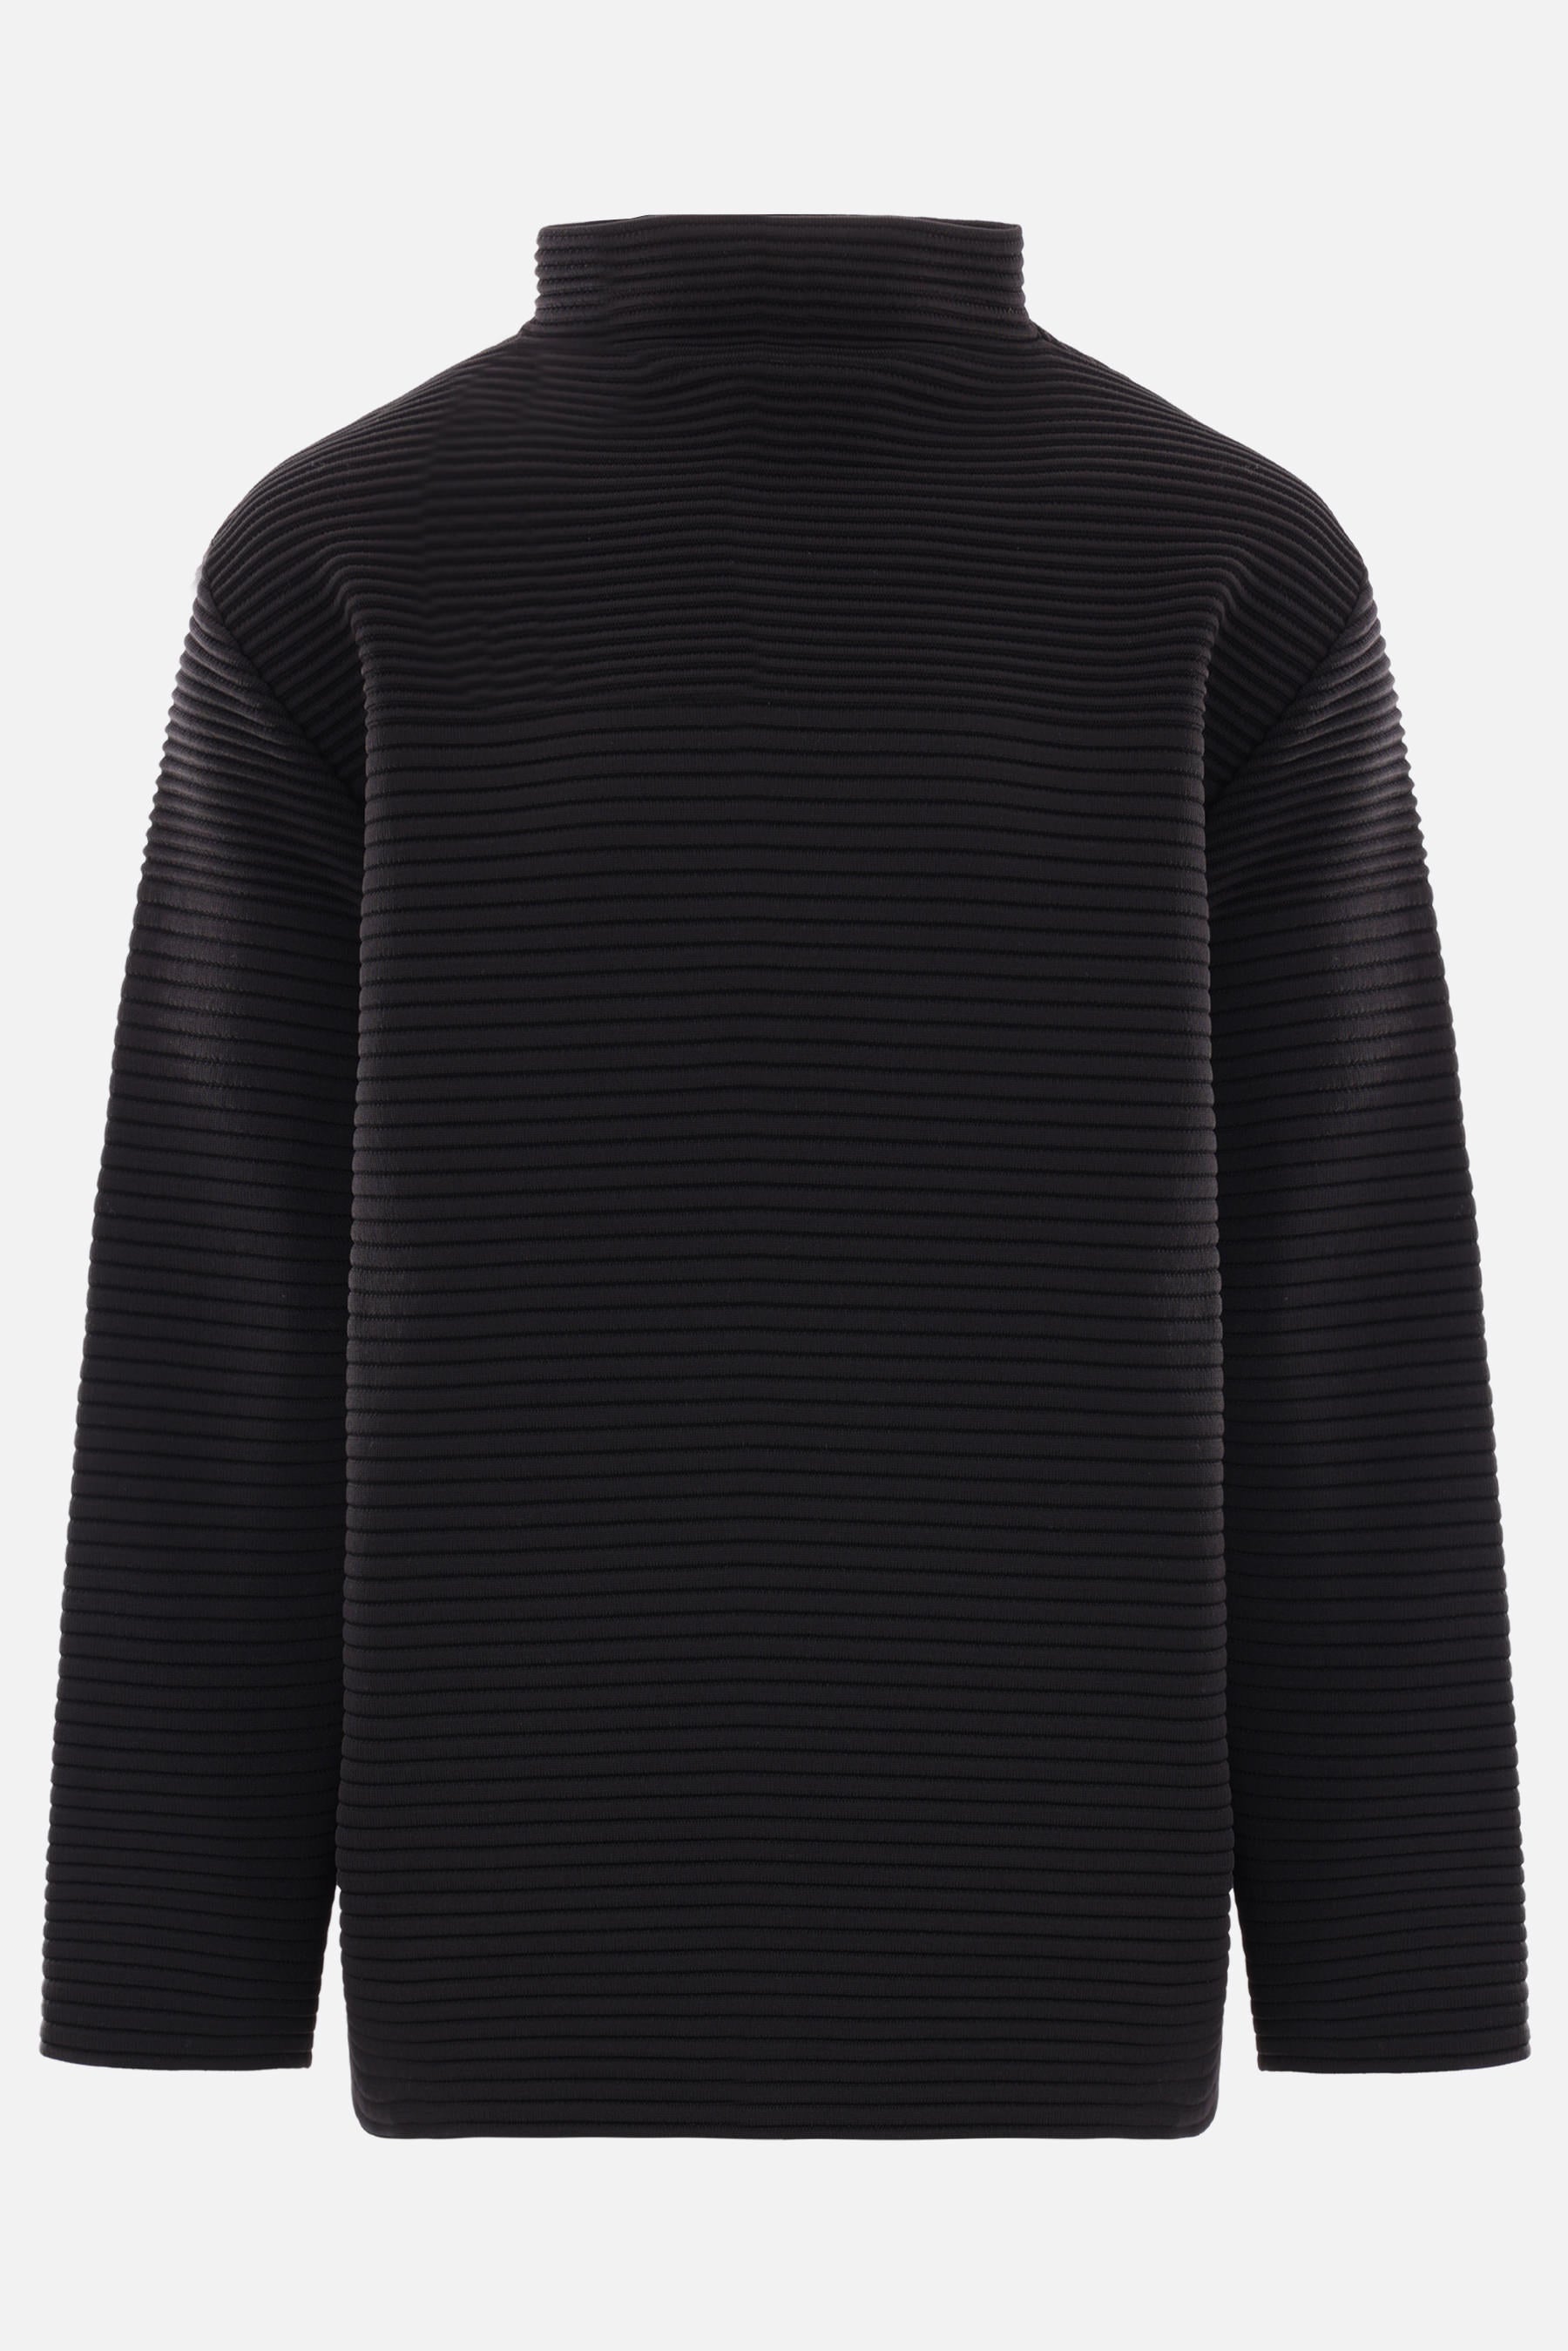 BS Stratum ribbed technical knit pullover